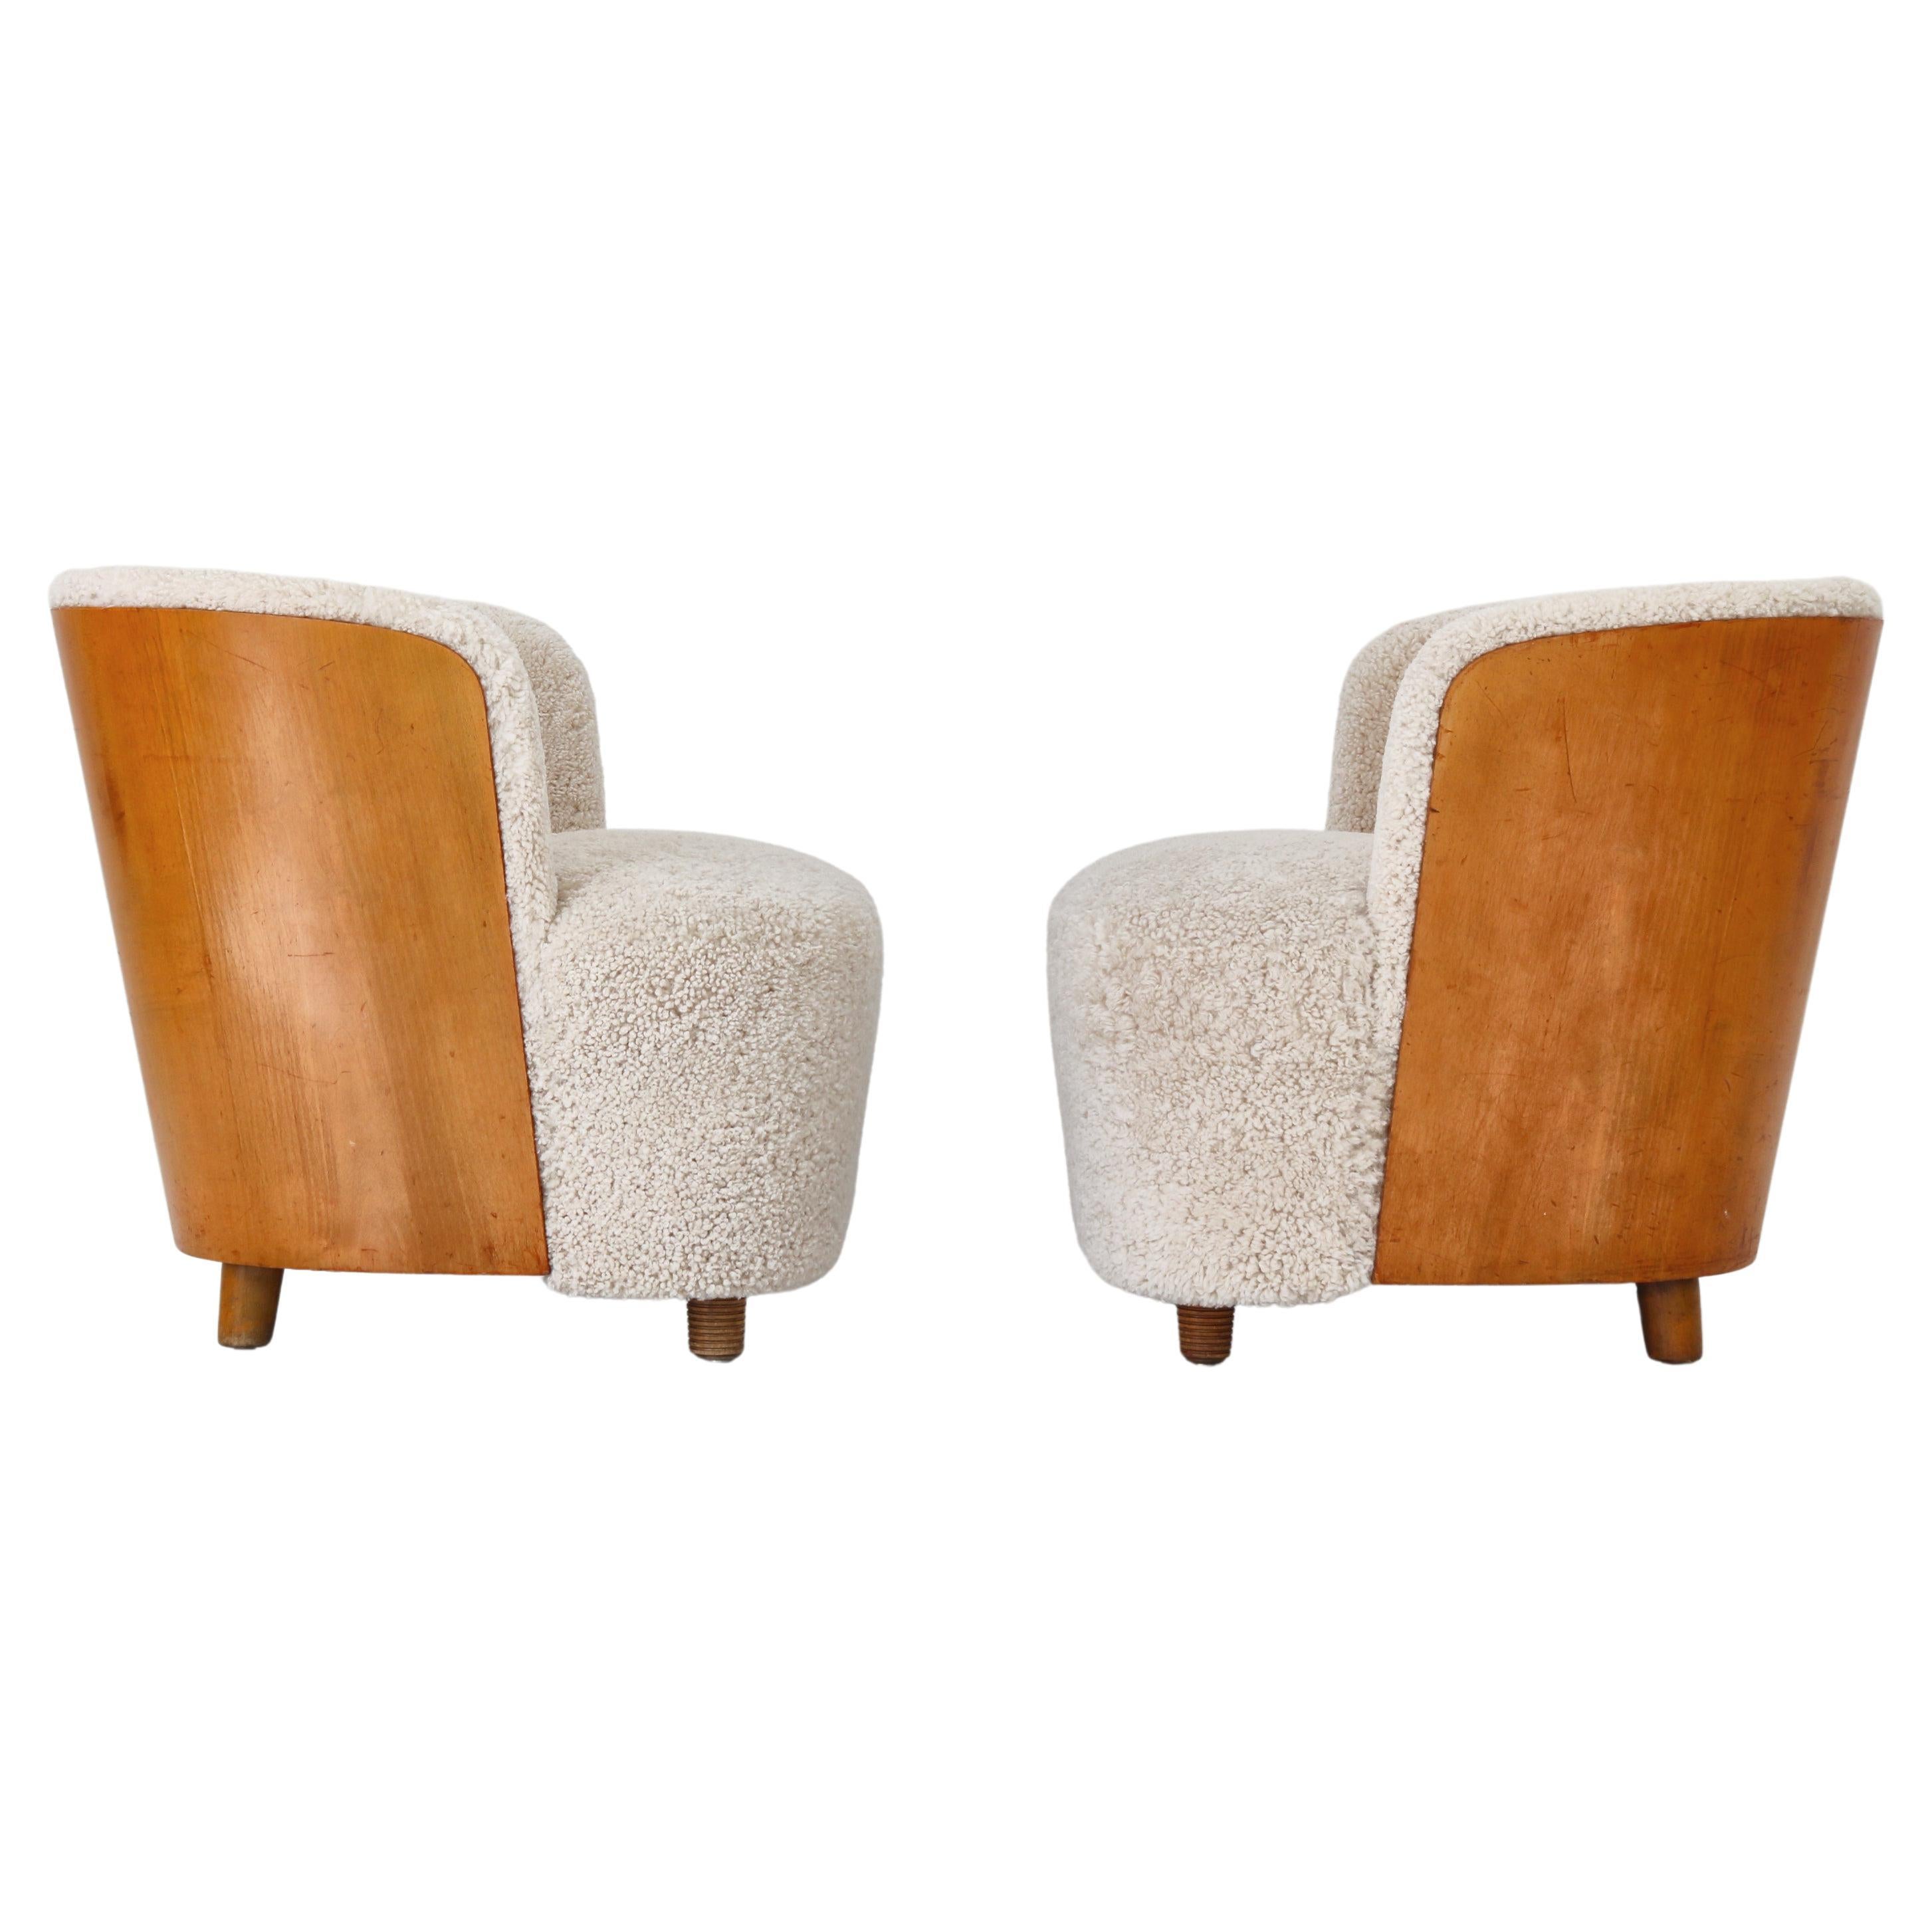 Scandinavian Modern Sheepskin and Peartree Easy Chairs by Rolf Engströmer, 1934 For Sale